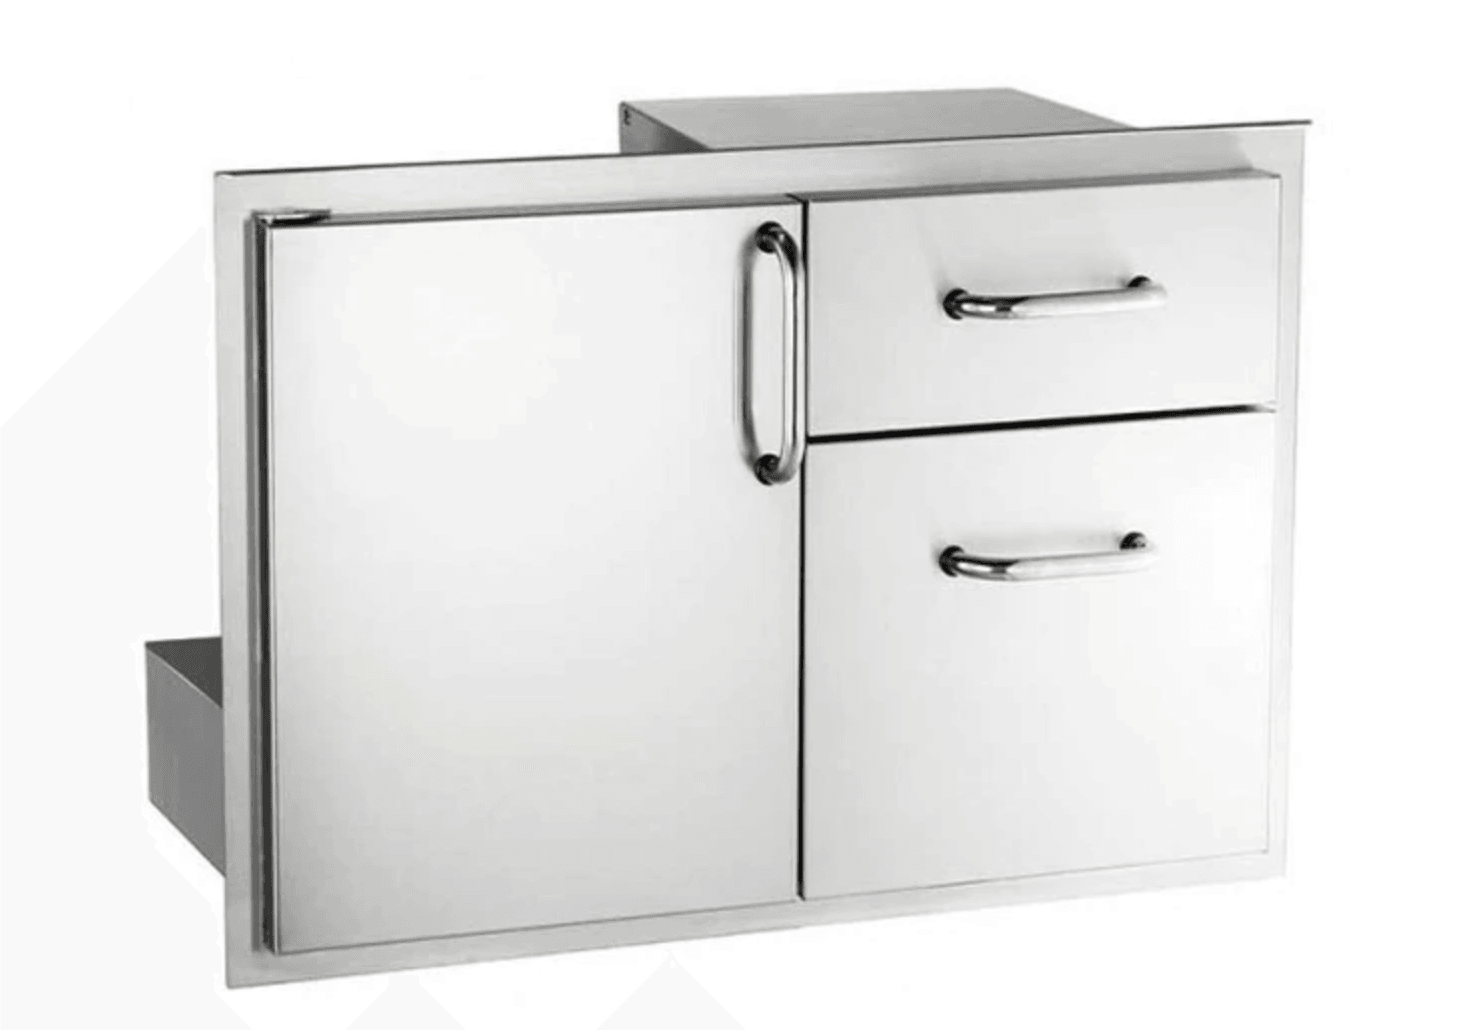 Fire Magic Kitchen Accessories 18" h x 30" w x 20-1/2" d Access Door with Double Drawer